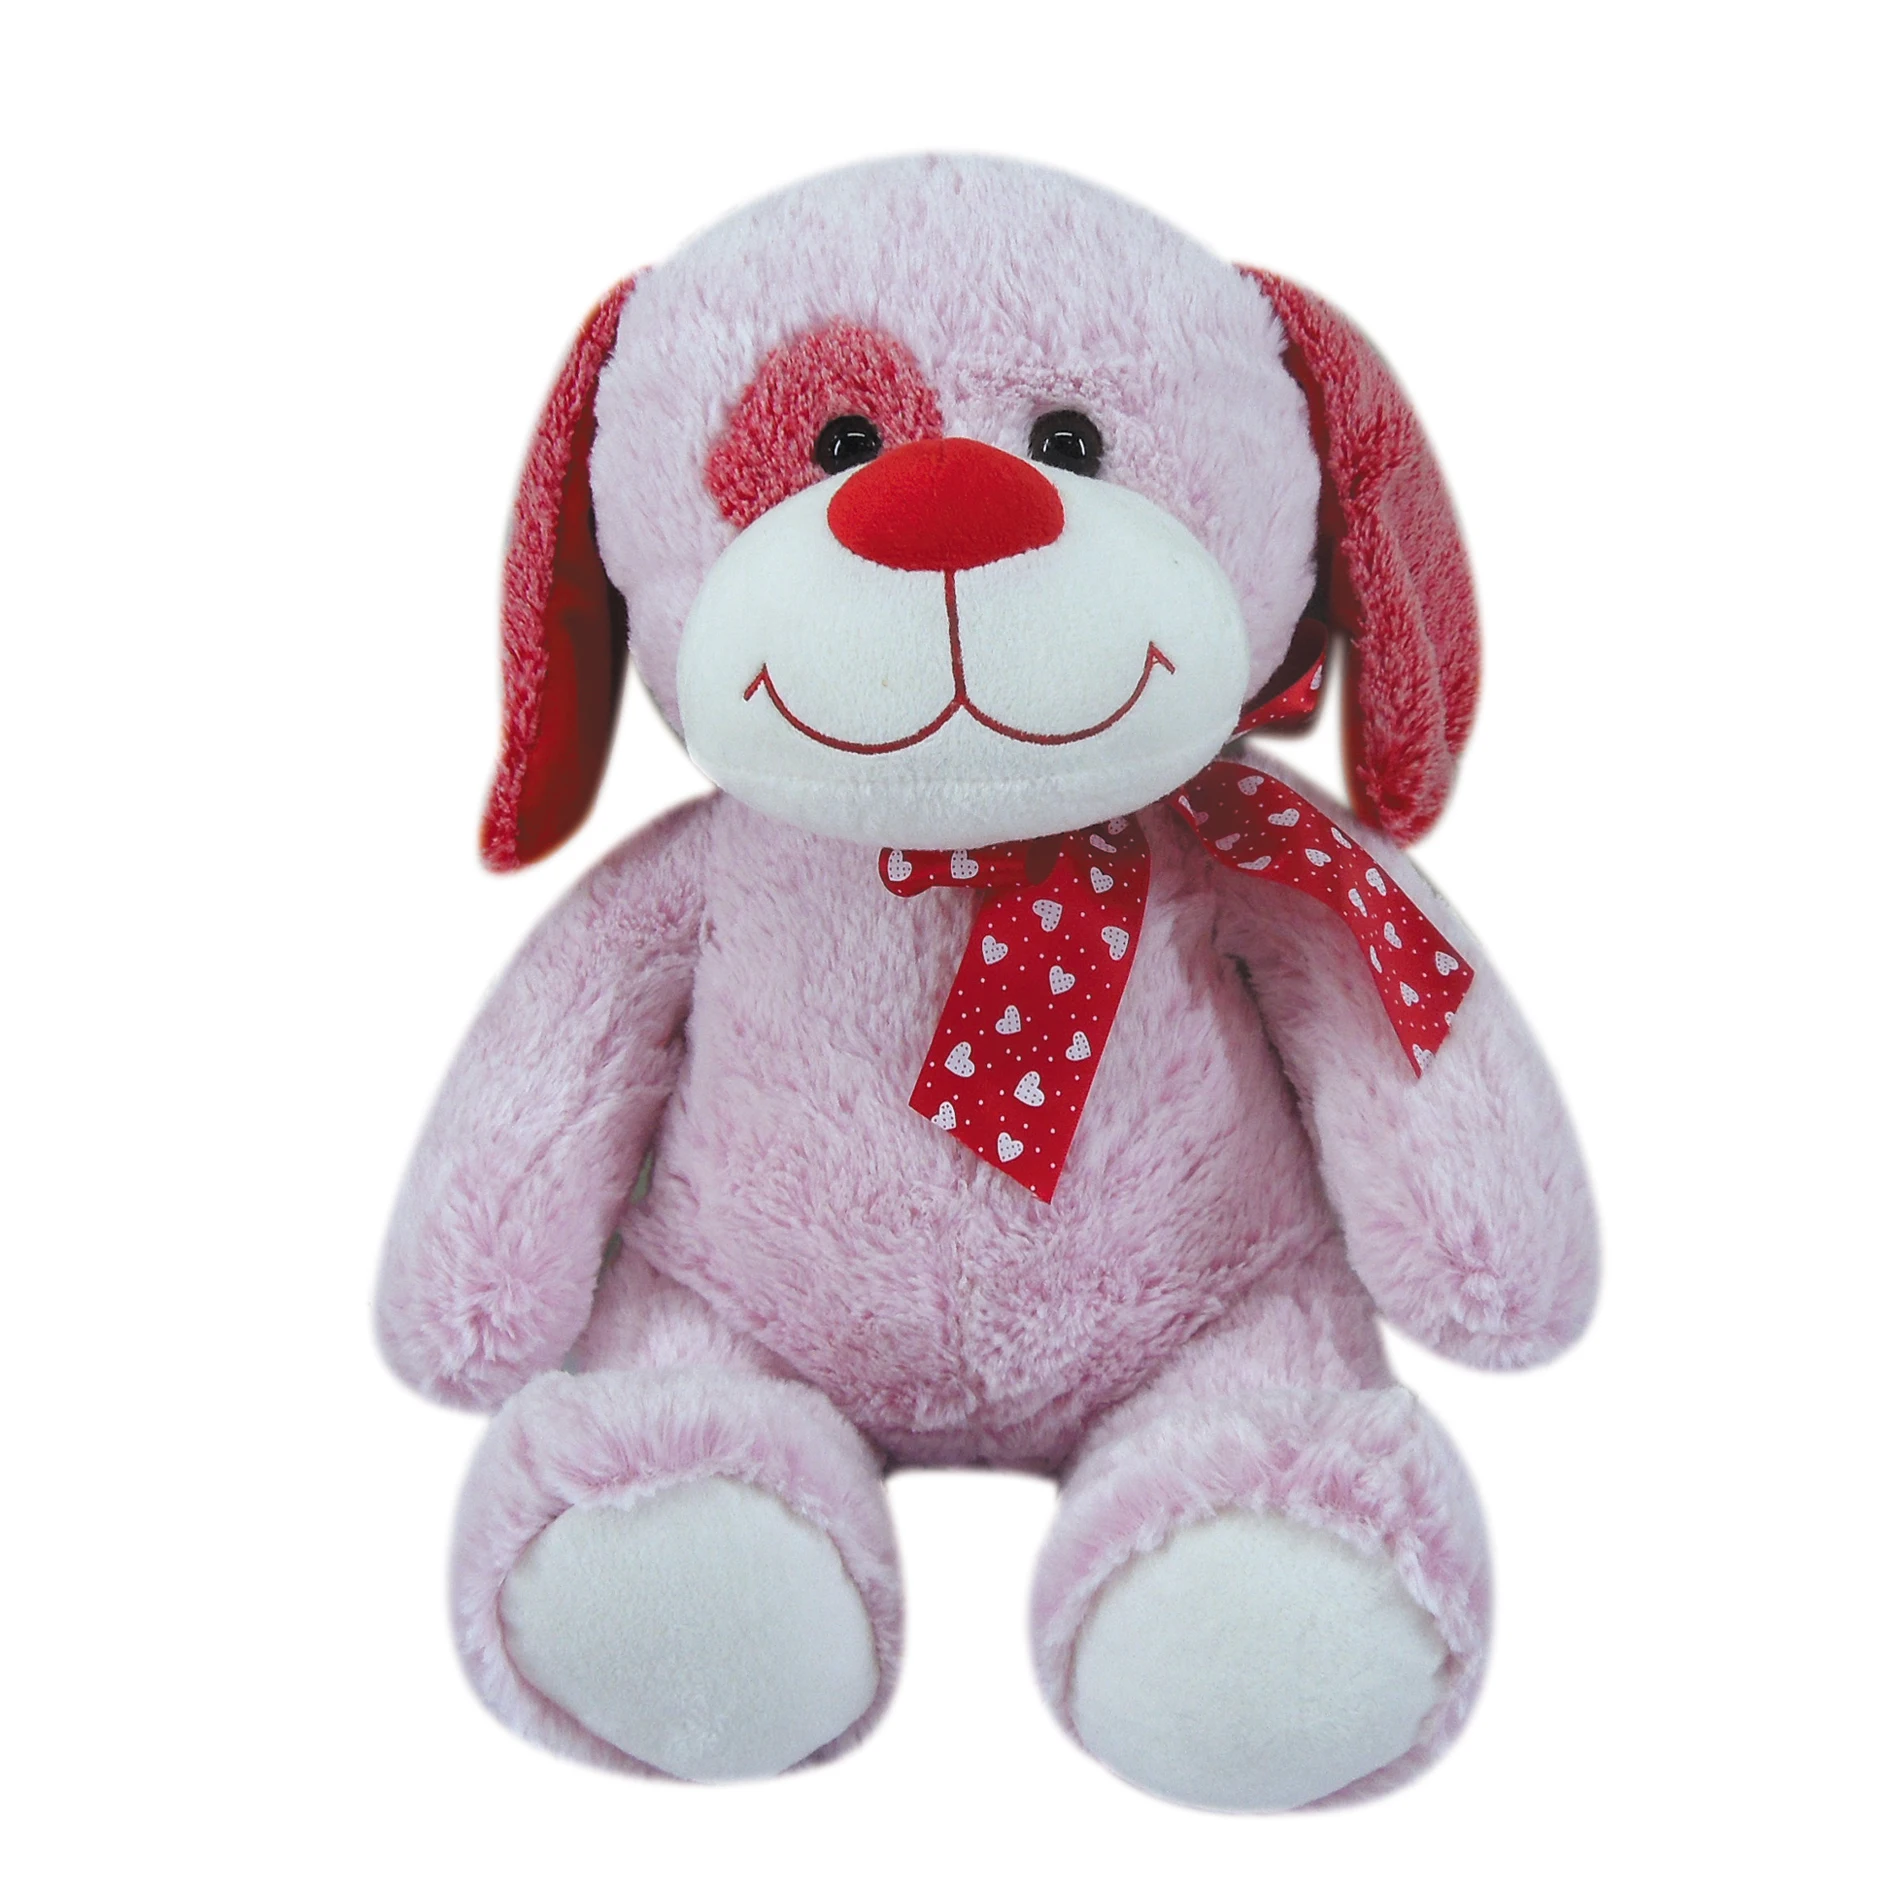 Beautiful Valentine 14inch Valentine's Day Stuffed Animal Pink Dog - Buy  Beautiful Valentine 14inch Valentine's Day Stuffed Animal Pink Dog,14inch  Valentine's Day Stuffed Animal Pink Dog,Stuffed Animal Pink Dog Product on  